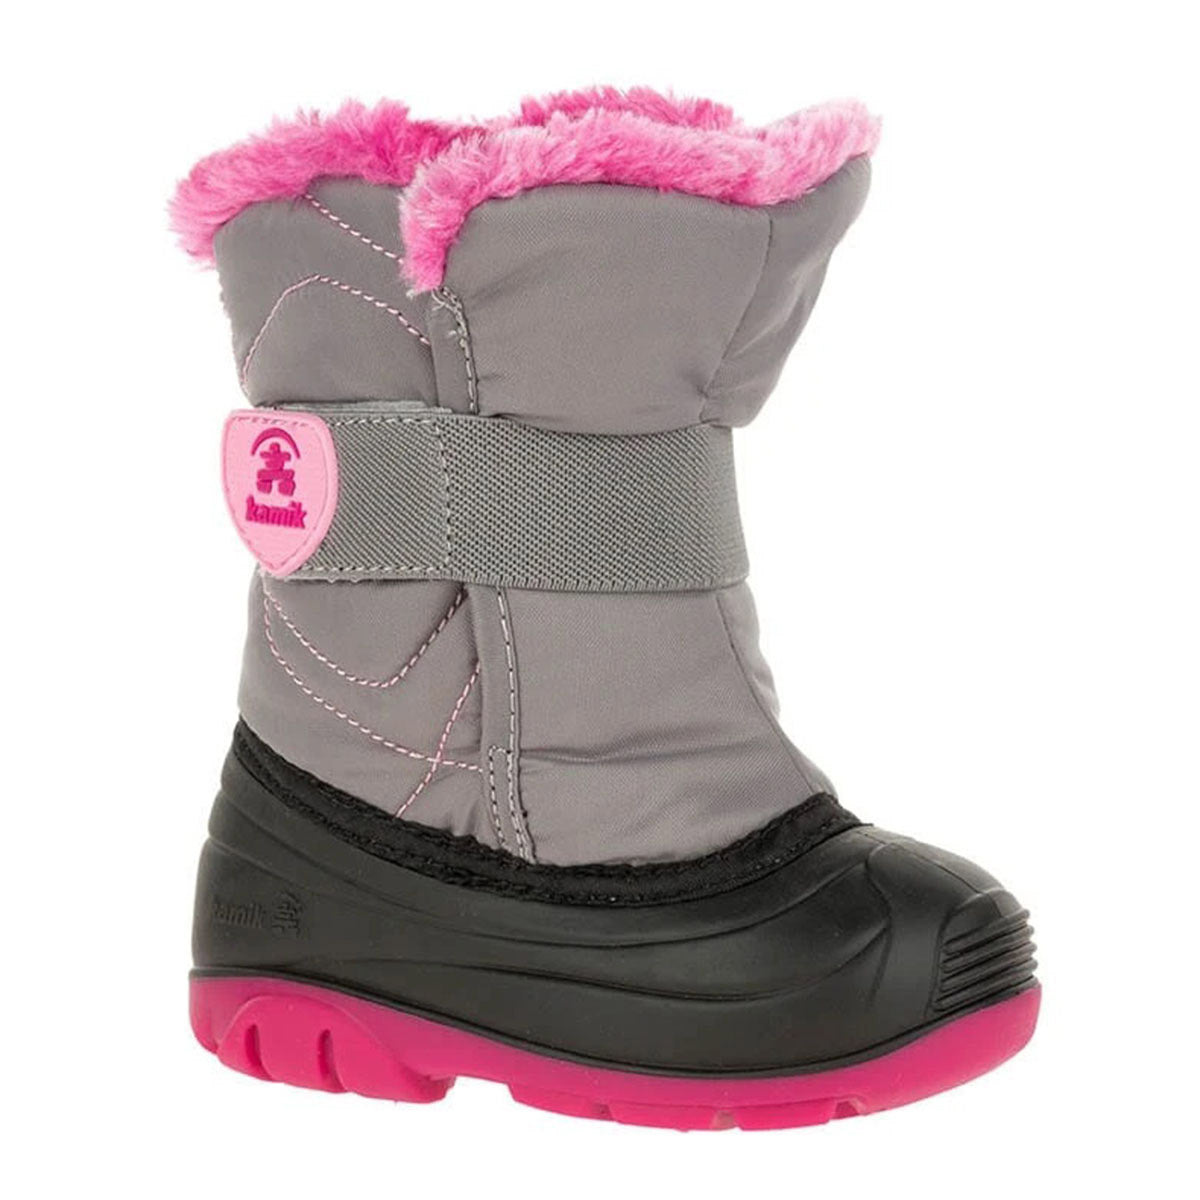 A Kamik snowboot for toddlers with pink accents and a velcro strap.